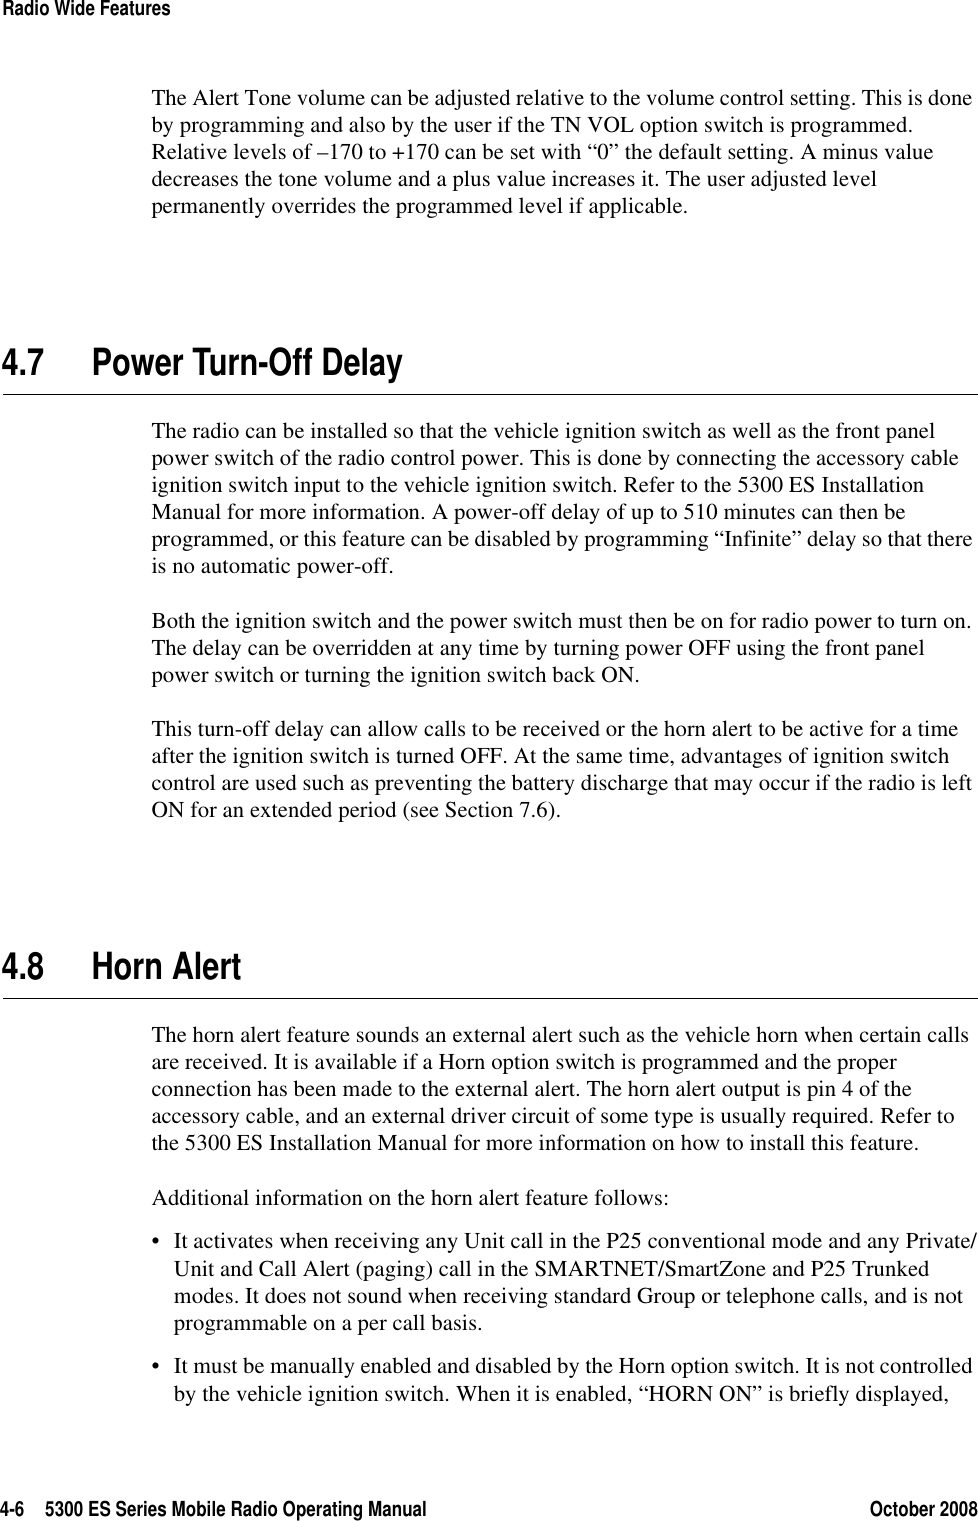 4-6 5300 ES Series Mobile Radio Operating Manual October 2008Radio Wide FeaturesThe Alert Tone volume can be adjusted relative to the volume control setting. This is done by programming and also by the user if the TN VOL option switch is programmed. Relative levels of –170 to +170 can be set with “0” the default setting. A minus value decreases the tone volume and a plus value increases it. The user adjusted level permanently overrides the programmed level if applicable.4.7 Power Turn-Off DelayThe radio can be installed so that the vehicle ignition switch as well as the front panel power switch of the radio control power. This is done by connecting the accessory cable ignition switch input to the vehicle ignition switch. Refer to the 5300 ES Installation Manual for more information. A power-off delay of up to 510 minutes can then be programmed, or this feature can be disabled by programming “Infinite” delay so that there is no automatic power-off.Both the ignition switch and the power switch must then be on for radio power to turn on. The delay can be overridden at any time by turning power OFF using the front panel power switch or turning the ignition switch back ON.This turn-off delay can allow calls to be received or the horn alert to be active for a time after the ignition switch is turned OFF. At the same time, advantages of ignition switch control are used such as preventing the battery discharge that may occur if the radio is left ON for an extended period (see Section 7.6).4.8 Horn AlertThe horn alert feature sounds an external alert such as the vehicle horn when certain calls are received. It is available if a Horn option switch is programmed and the proper connection has been made to the external alert. The horn alert output is pin 4 of the accessory cable, and an external driver circuit of some type is usually required. Refer to the 5300 ES Installation Manual for more information on how to install this feature.Additional information on the horn alert feature follows:• It activates when receiving any Unit call in the P25 conventional mode and any Private/Unit and Call Alert (paging) call in the SMARTNET/SmartZone and P25 Trunked modes. It does not sound when receiving standard Group or telephone calls, and is not programmable on a per call basis.• It must be manually enabled and disabled by the Horn option switch. It is not controlled by the vehicle ignition switch. When it is enabled, “HORN ON” is briefly displayed, 